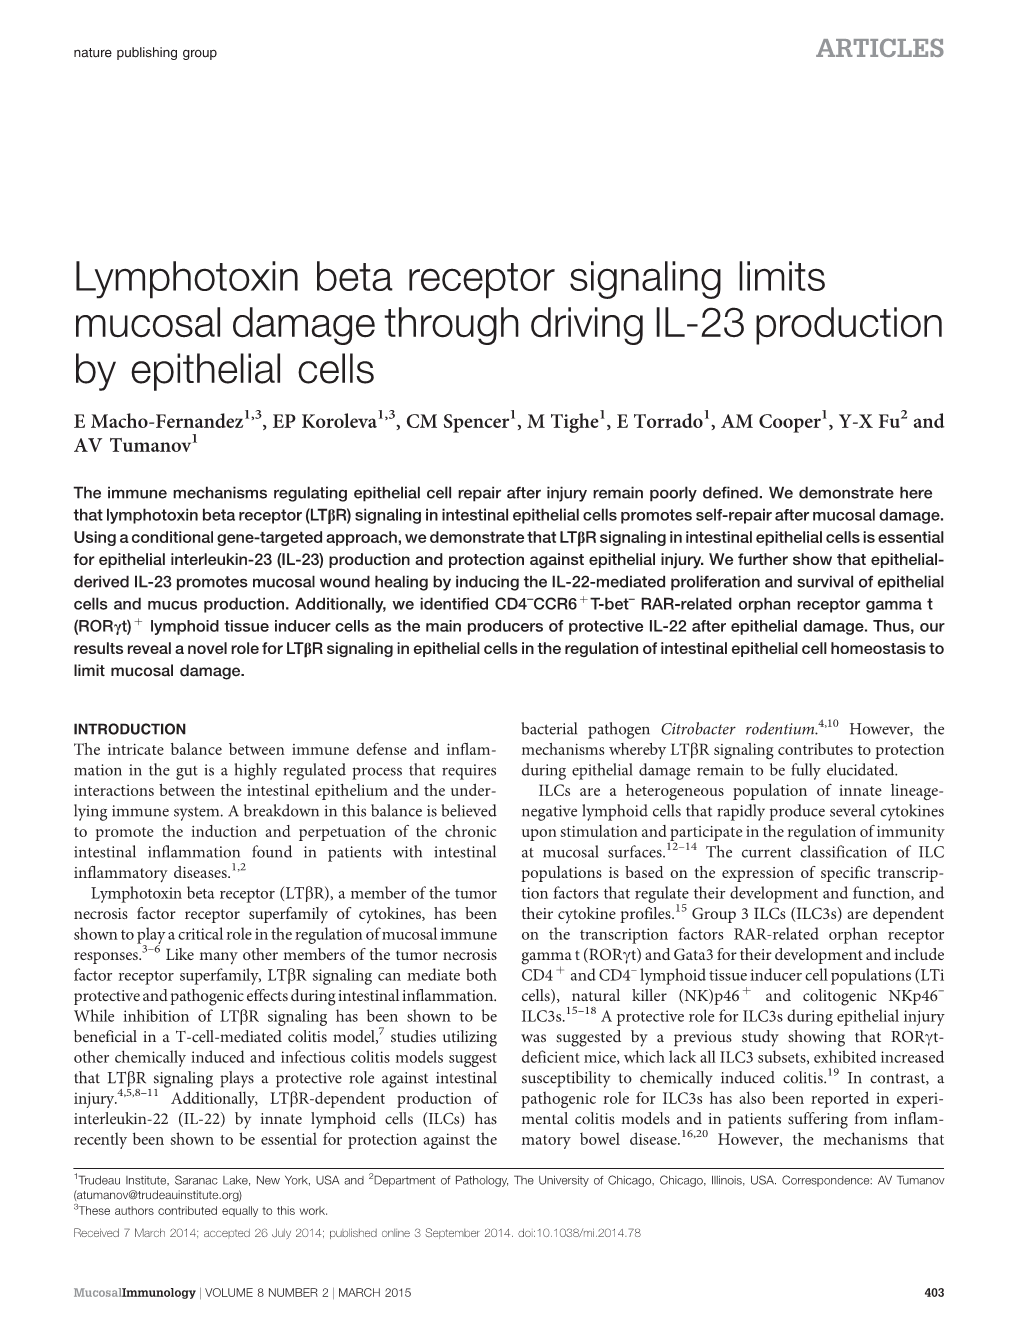 Lymphotoxin Beta Receptor Signaling Limits Mucosal Damage Through Driving IL-23 Production by Epithelial Cells